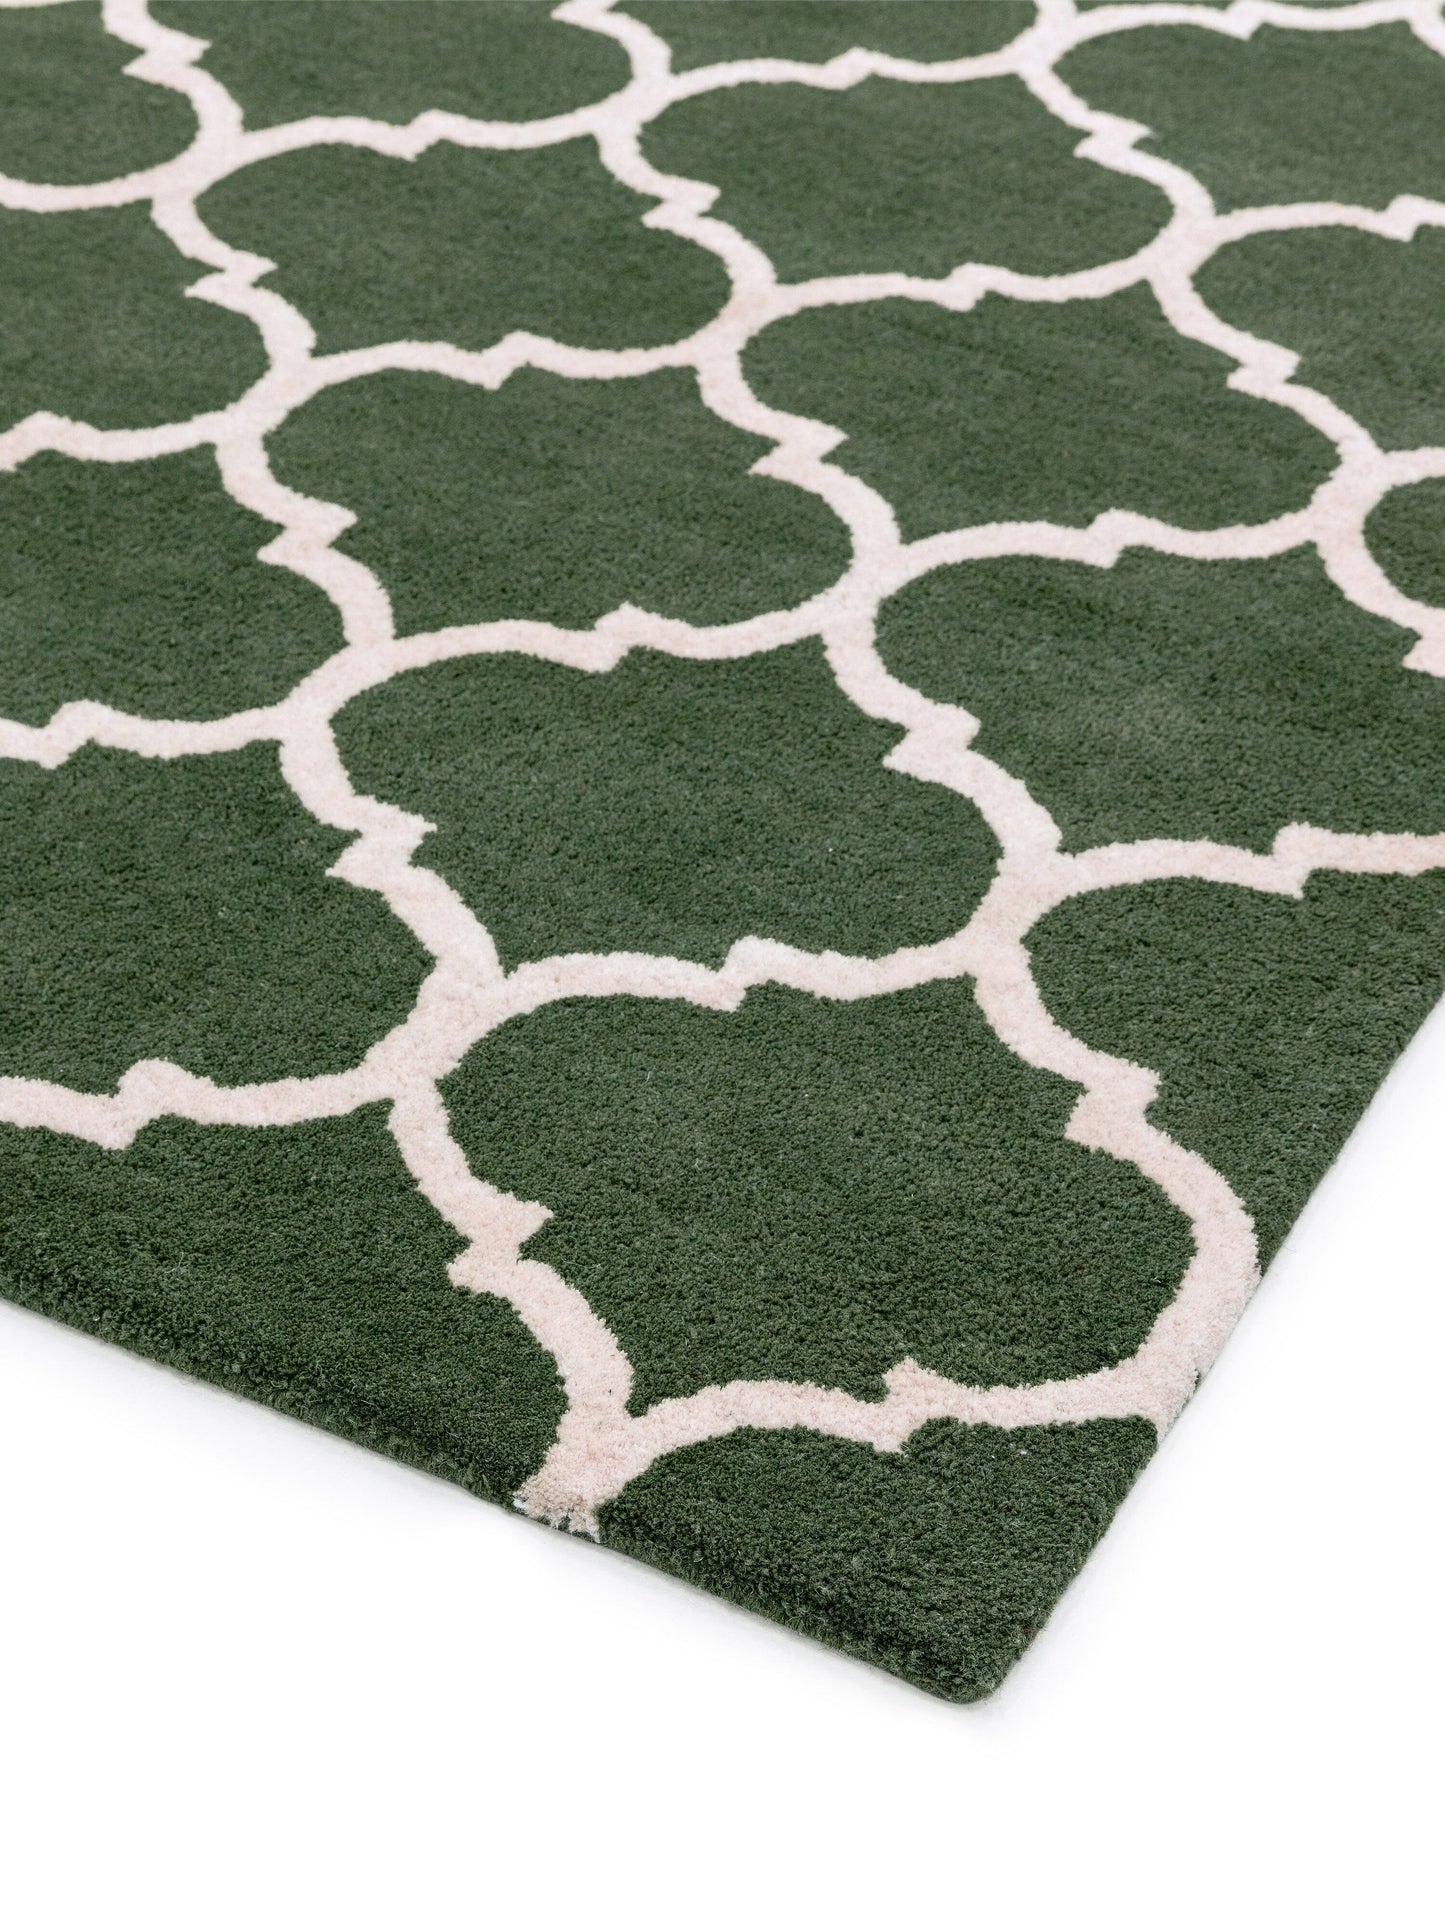 Asiatic Carpets Albany Handtufted Rug Ogee Green - 120 x 170cm